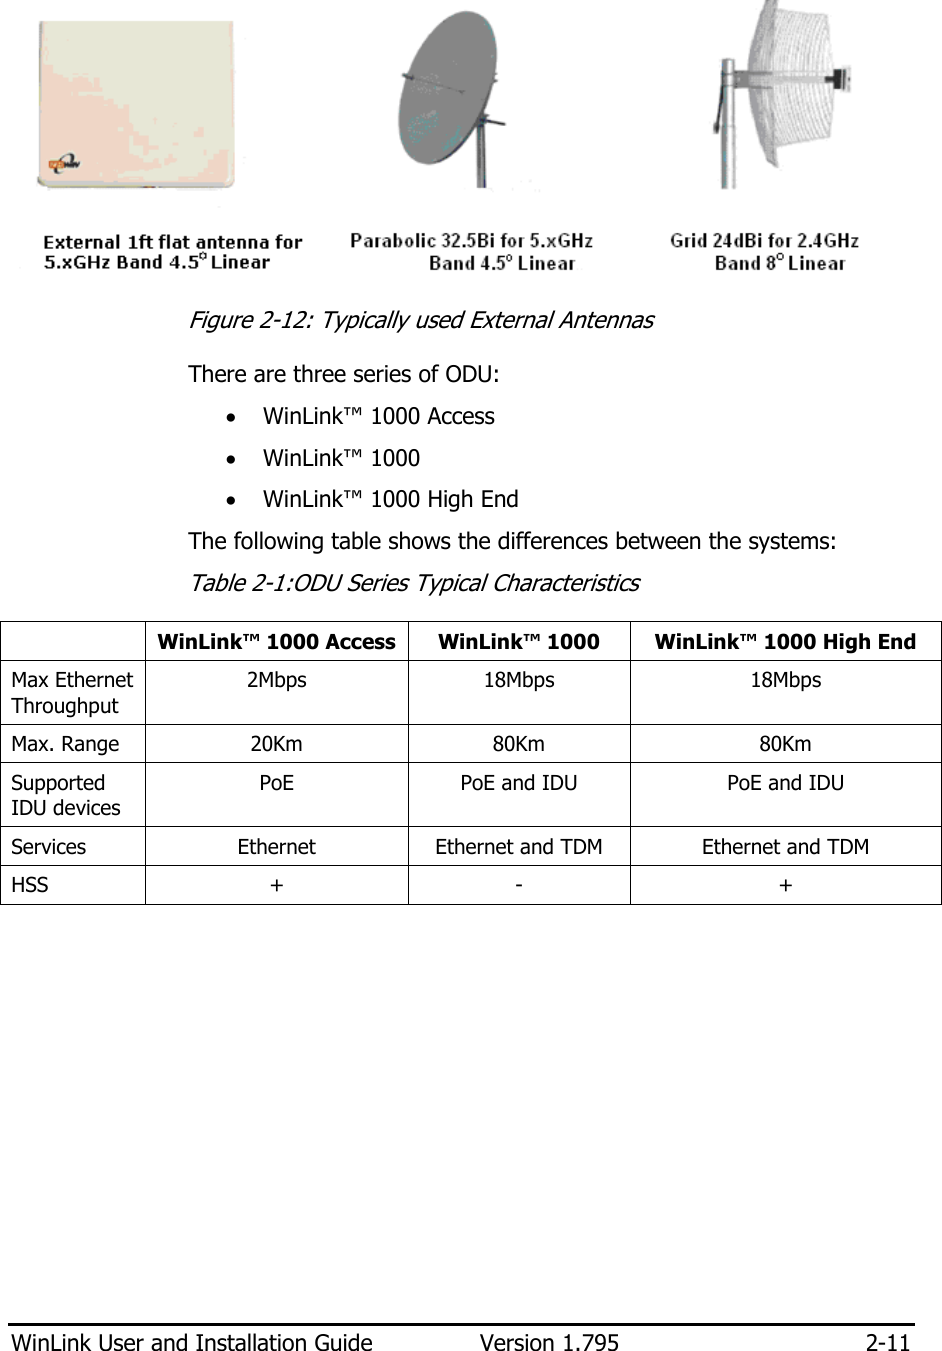  WinLink User and Installation Guide  Version 1.795  2-11    Figure  2-12: Typically used External Antennas There are three series of ODU: • WinLink™ 1000 Access • WinLink™ 1000  • WinLink™ 1000 High End The following table shows the differences between the systems: Table  2-1:ODU Series Typical Characteristics   WinLink™ 1000 Access WinLink™ 1000  WinLink™ 1000 High End Max Ethernet Throughput 2Mbps  18Mbps  18Mbps Max. Range  20Km  80Km  80Km Supported IDU devices PoE  PoE and IDU  PoE and IDU Services  Ethernet  Ethernet and TDM  Ethernet and TDM HSS  +  -  +        